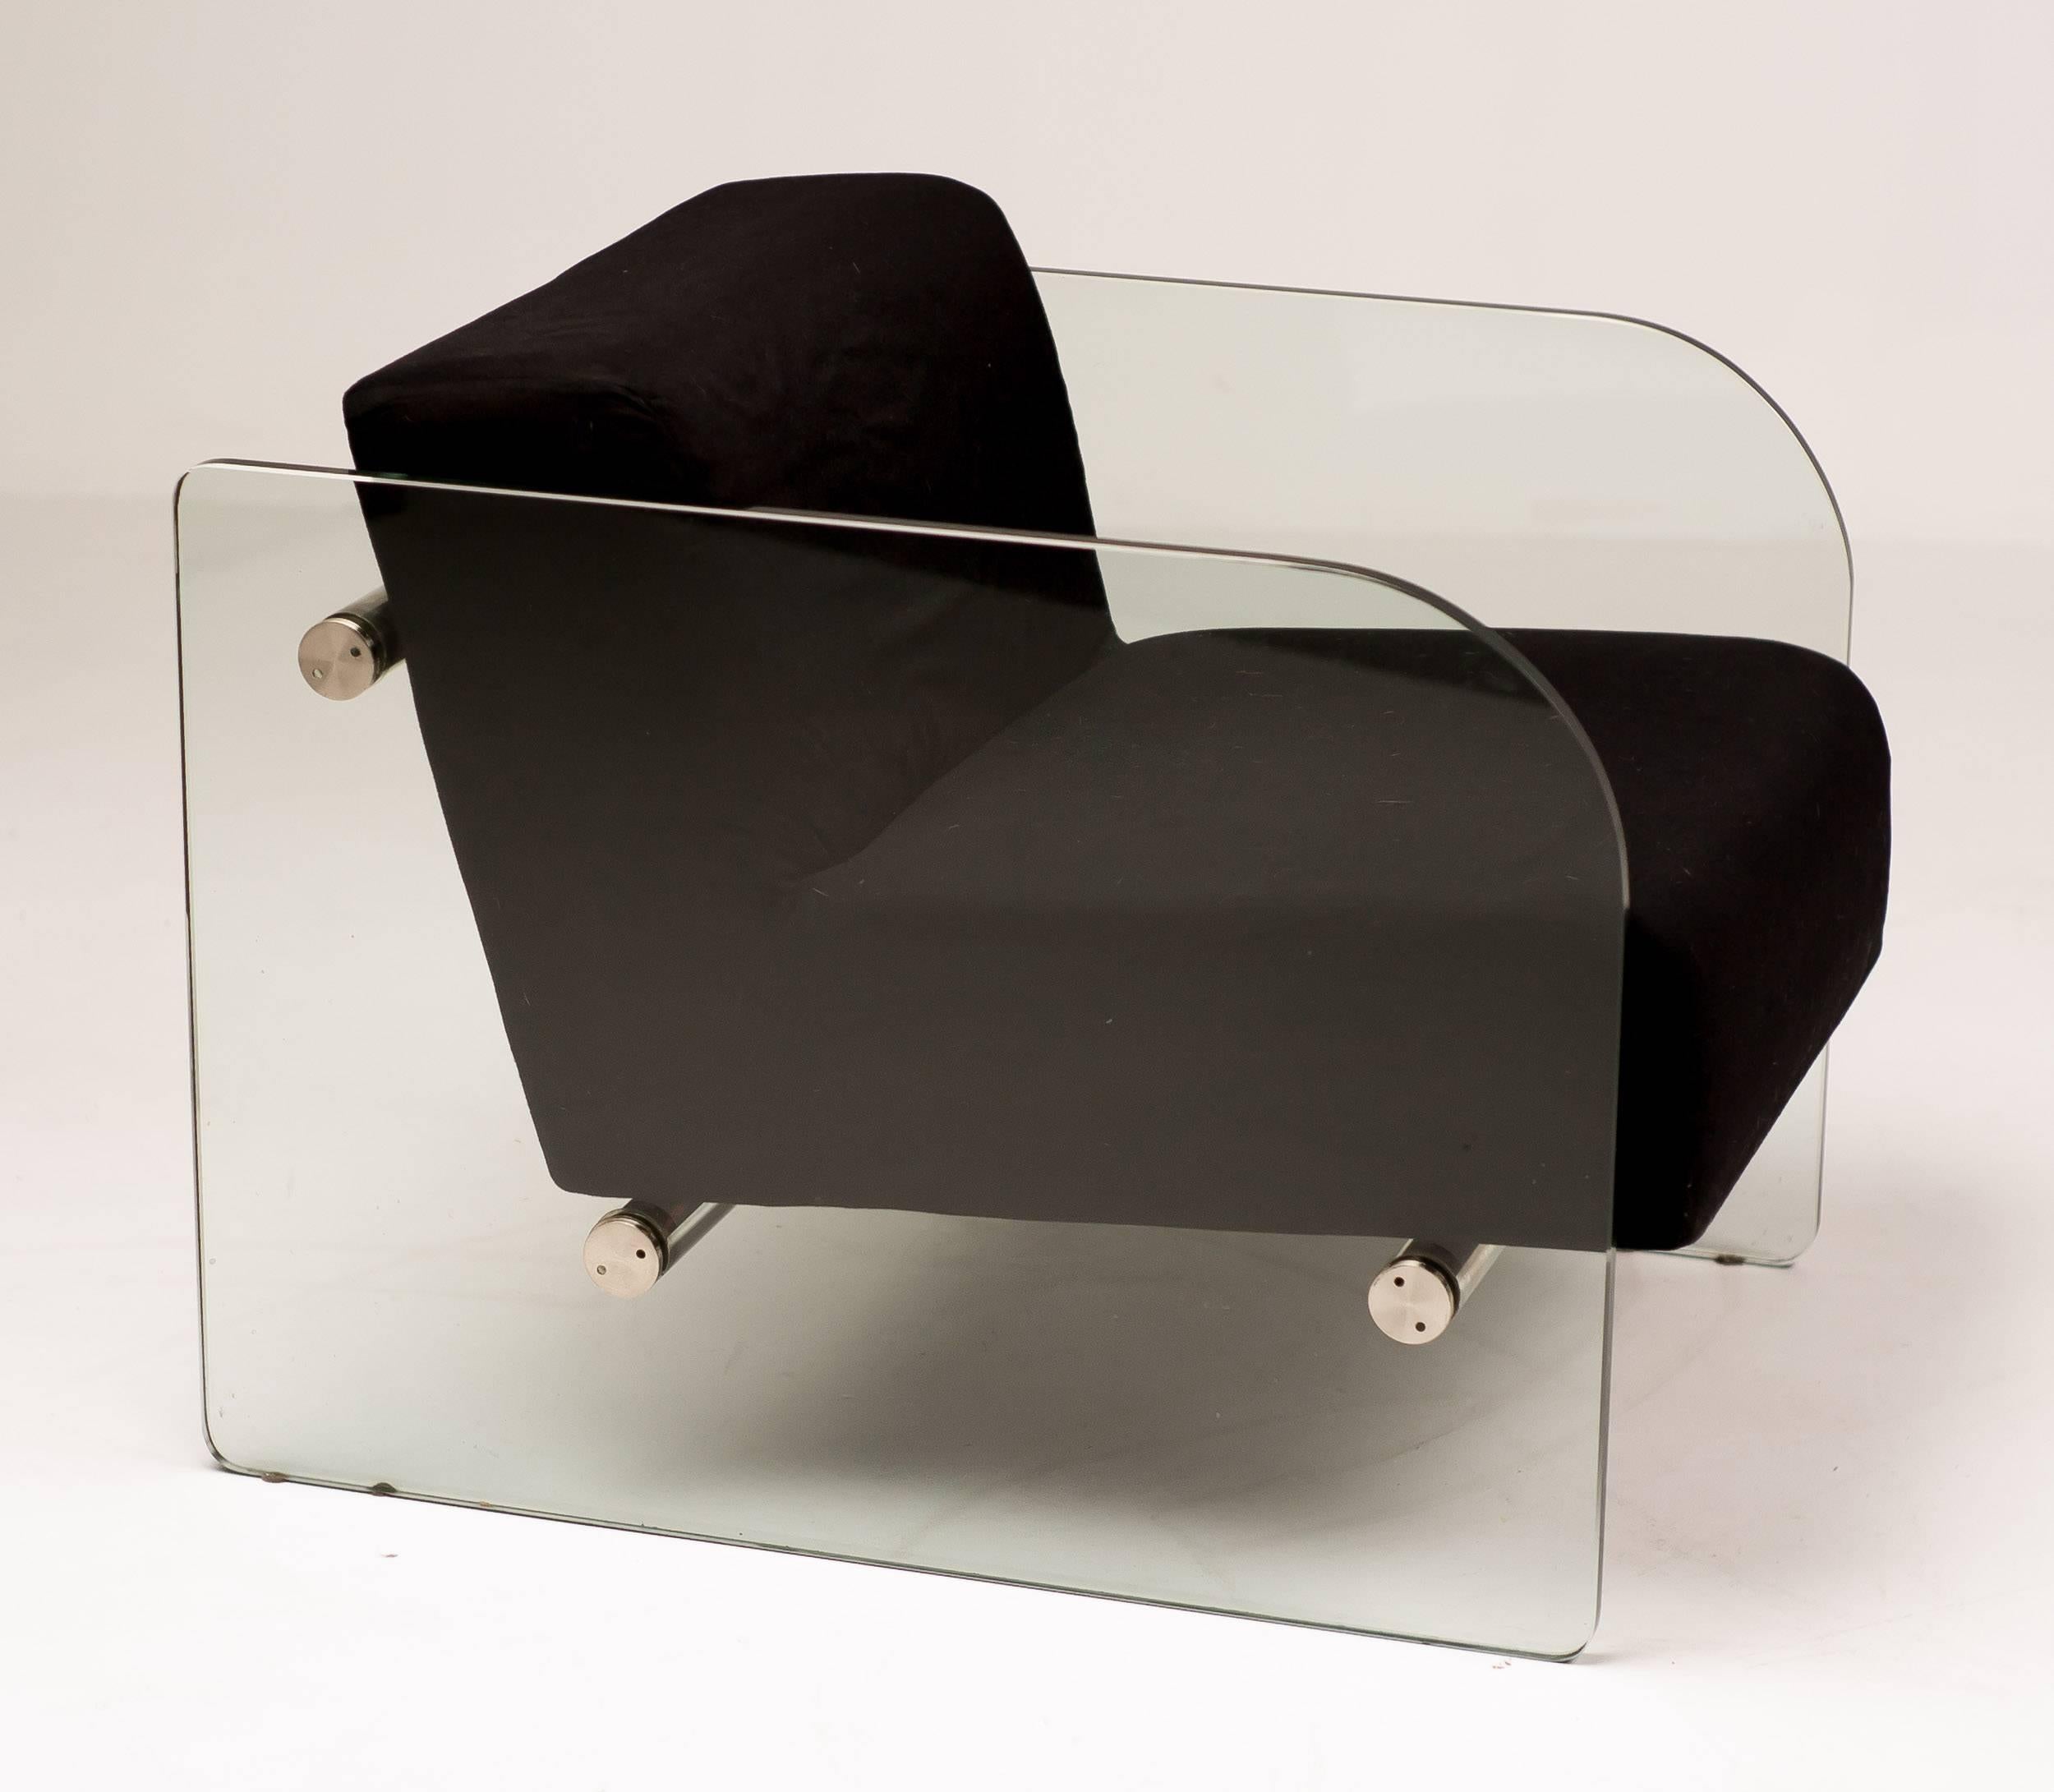 Lounge chair with tempered glass side-panels in the manner of the Hyaline chair by Italian designer Fabio Lenci. The black fabric upholstered seating unit is supported by three stainless steel rods.

Excellent fast and affordable worldwide